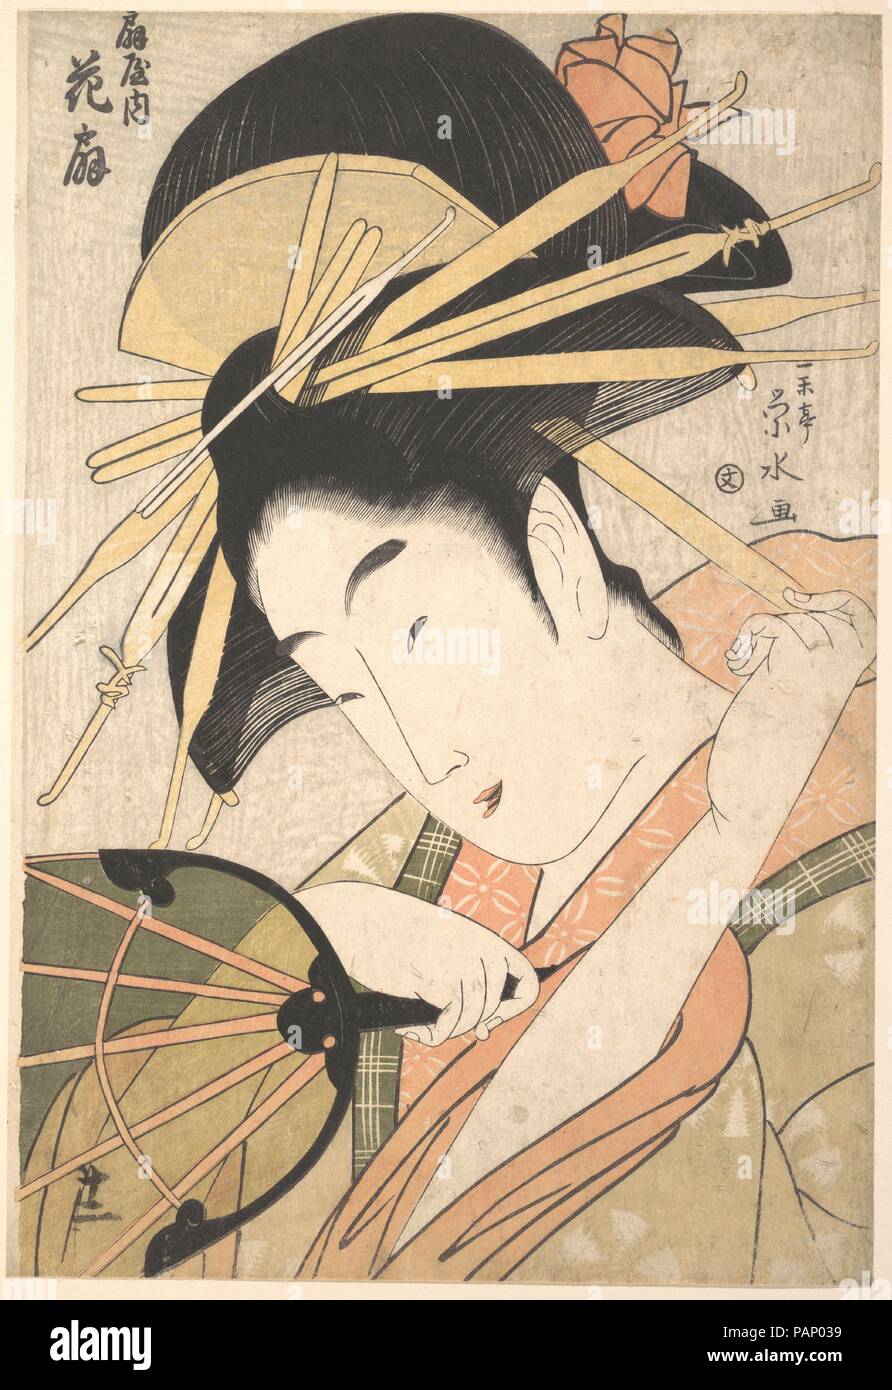 The Courtesan Hanaogi of the Ogiya Brothel (Ogiya no uchi Hanaogi). Artist: Ichirakutei Eisui (Japanese, active ca. 1793-1801). Culture: Japan. Dimensions: H. 14 5/8 in. (37.1 cm); W. 9 15/16 in. (25.2 cm). Date: 1790s.  The courtesan Hanaogi fiddles with one of the hairpins holding her magnificent coiffure in place. She grasps a semitransparent circular fan that recalls her brothel's name, Ogiya, literally 'House of Fans.' Hanaogi was a name used by a succession of high-ranking courtesans of this house. This image is in all likelihood meant to represent Hanaogi VI, who was known to be talente Stock Photo